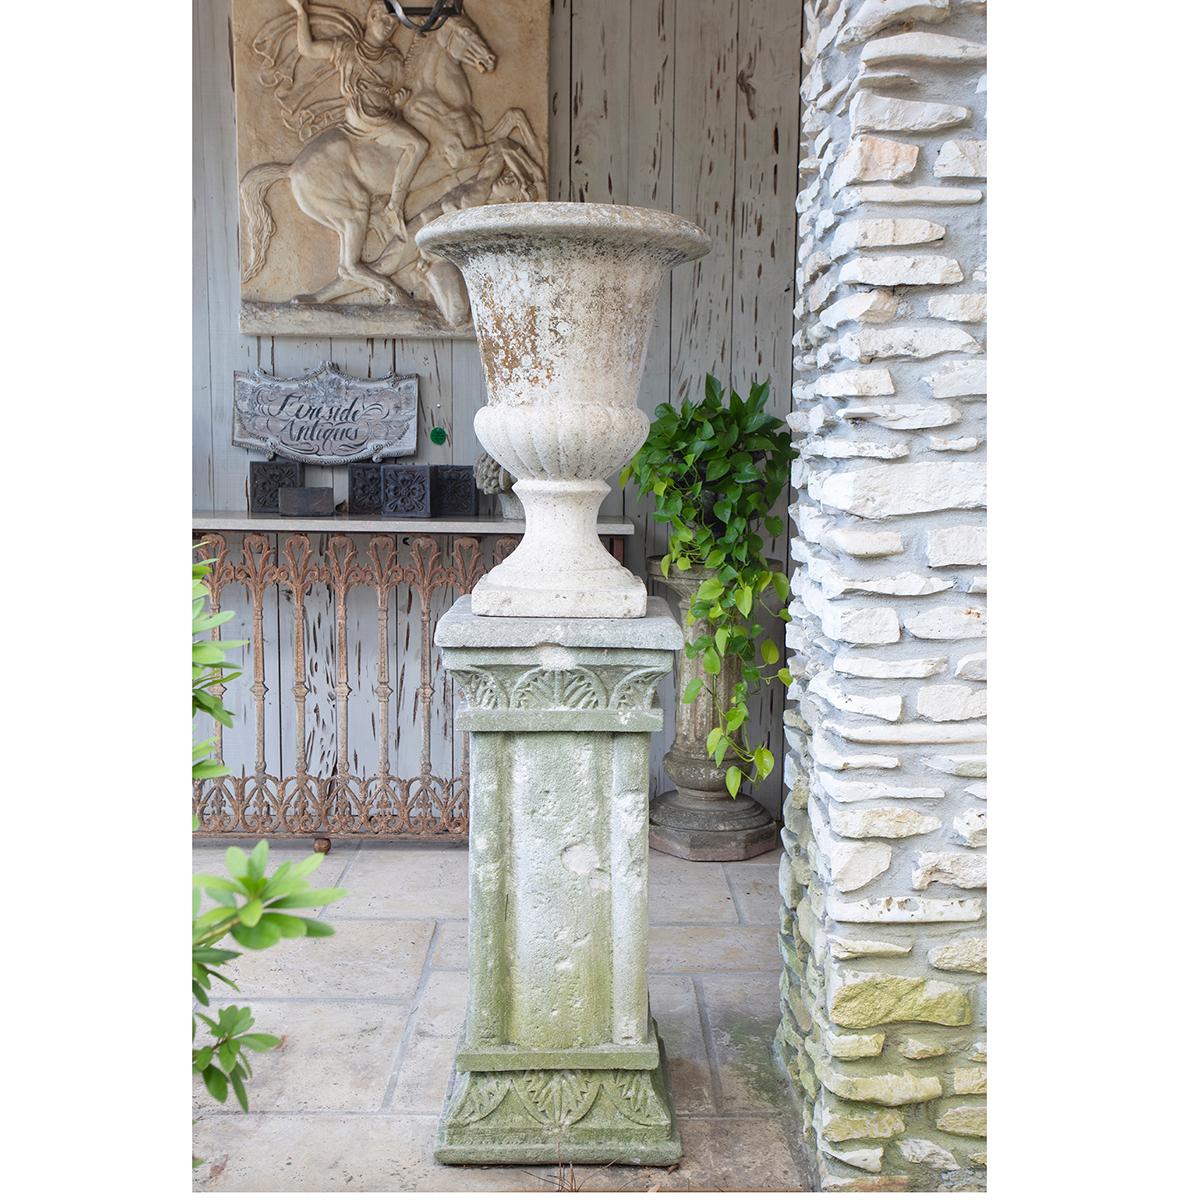 Beautifully weathered French cast stone urn and pedestal. Both pieces have an earthy patina, with moss on the square columnar pedestal. They will add character to any garden or landscape. Urn dimensions: 26” height x 20” diameter. Pedestal